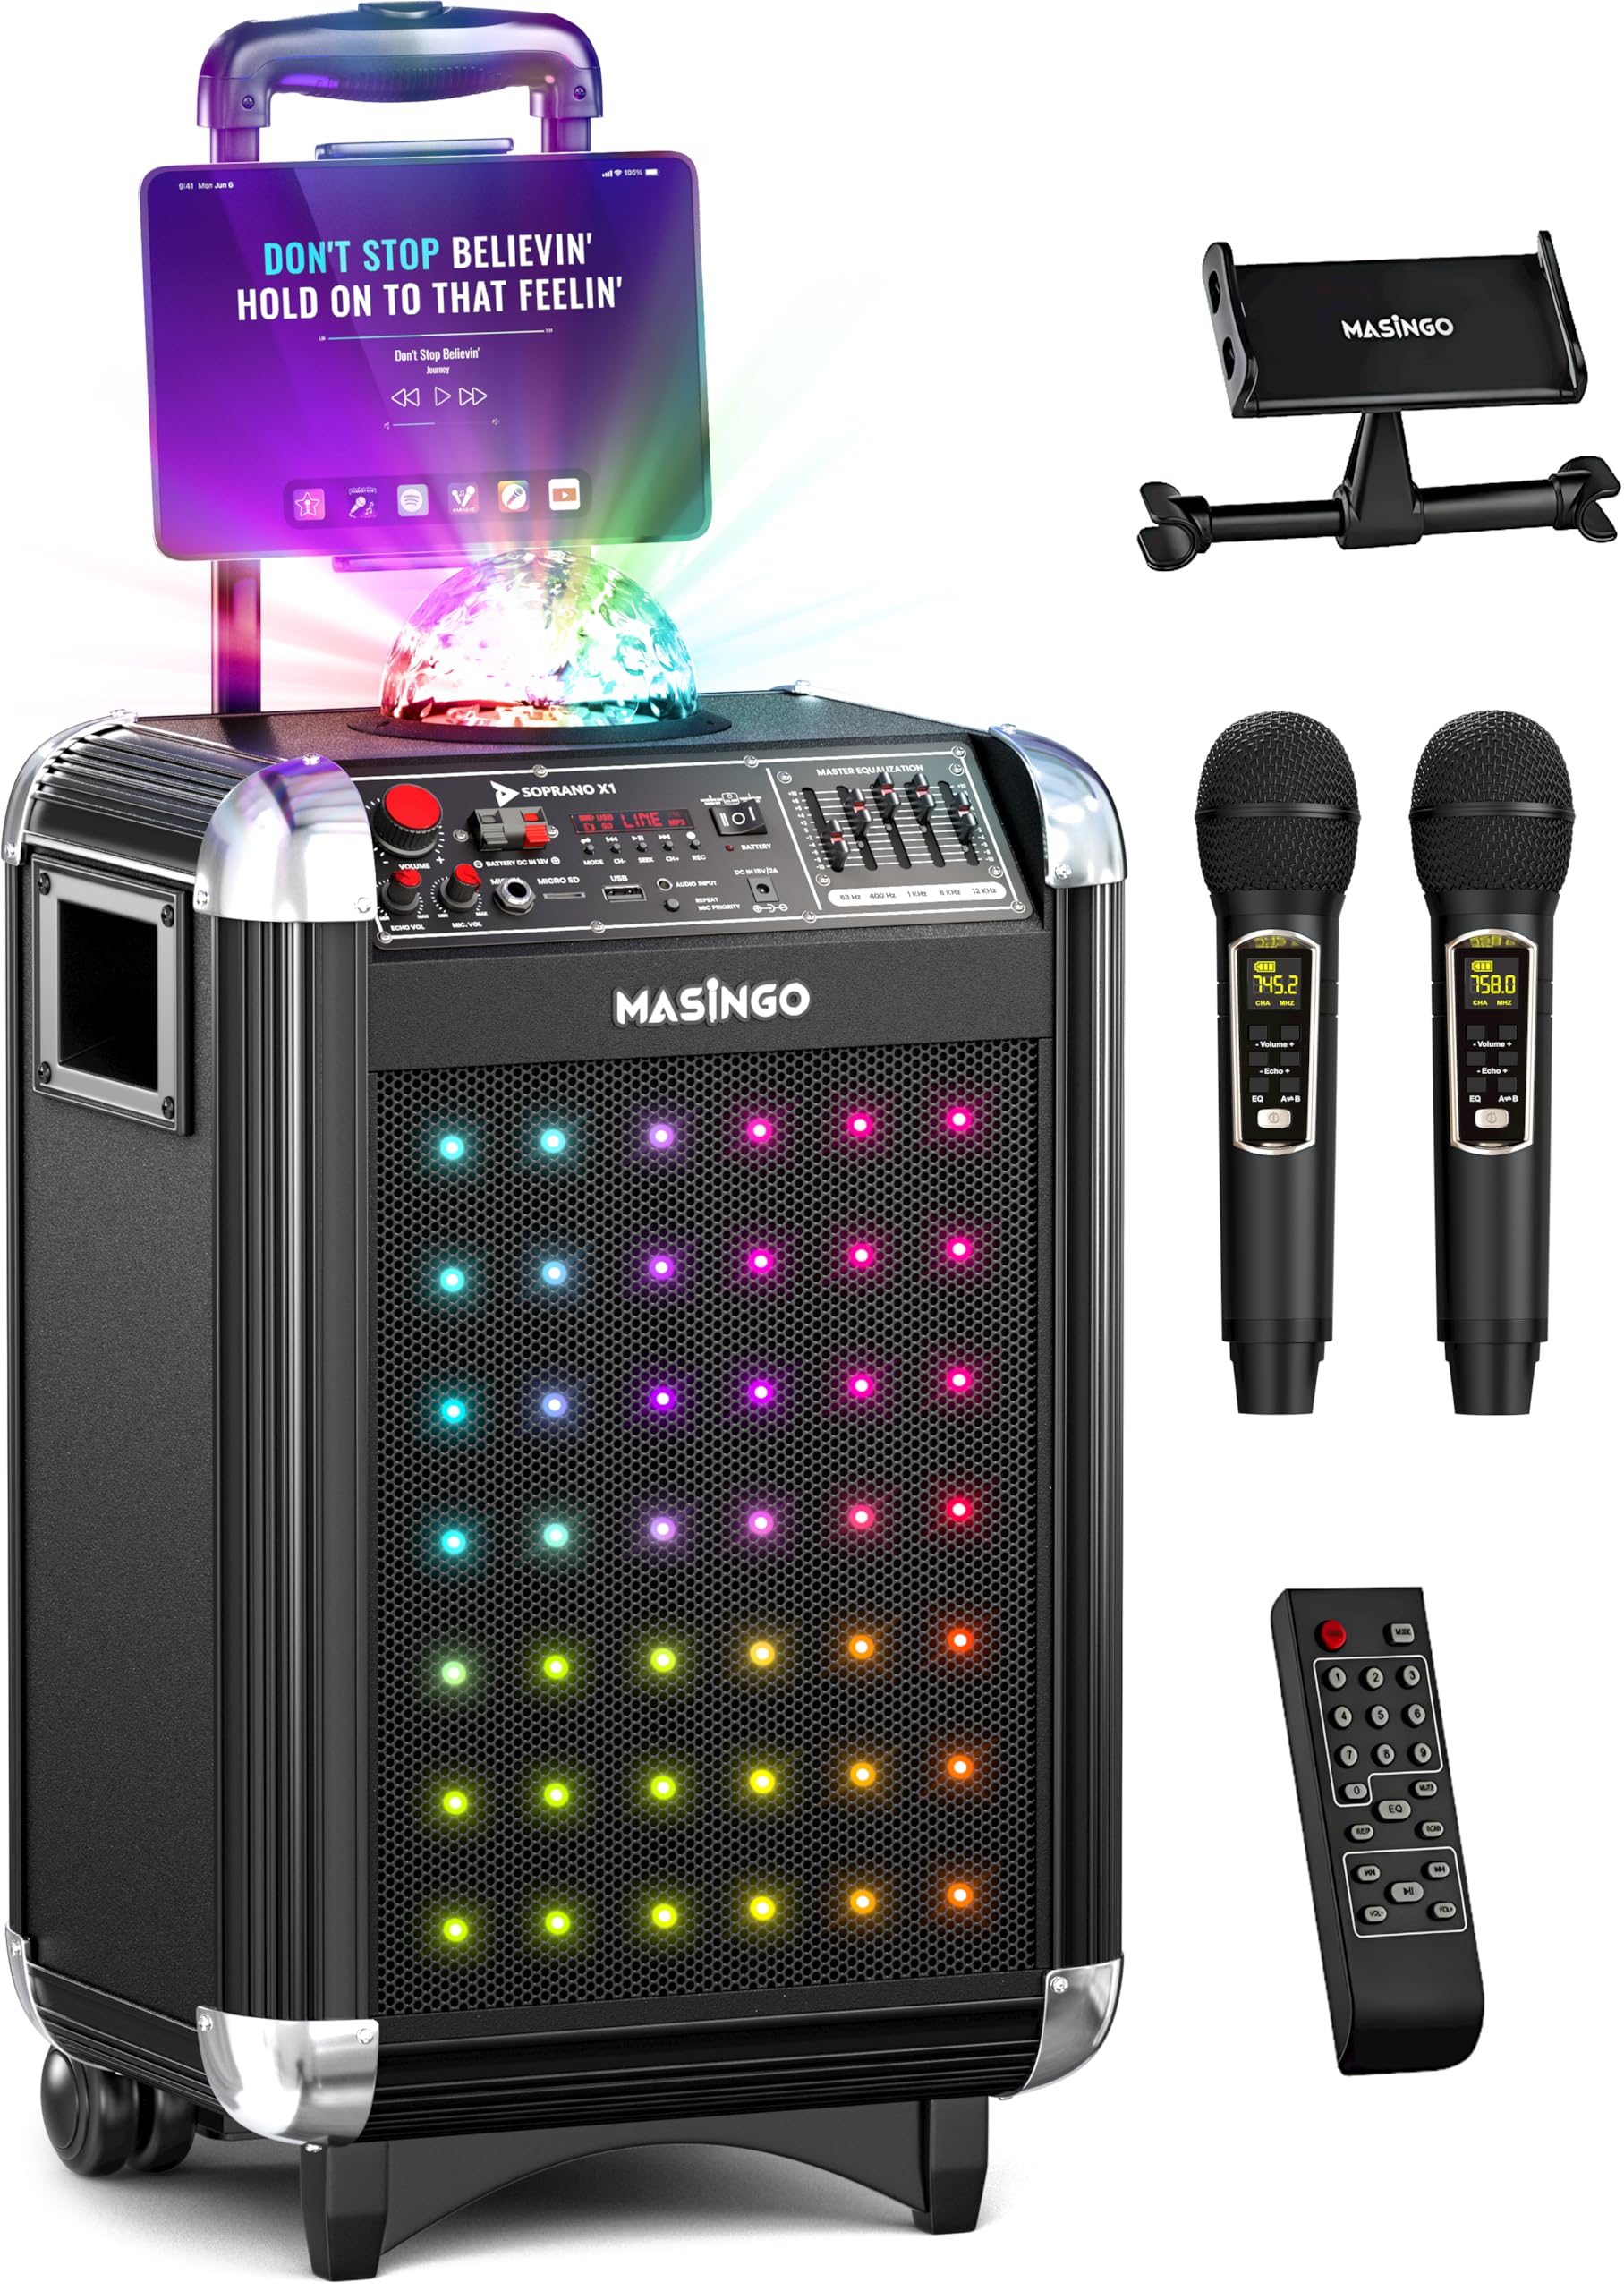 MASINGO Karaoke Machine for Adults and Kids with 2 Bluetooth Wireless Microphones. Portable Singing PA Speaker System with Disco Ball Party Lights, Lyrics Display Tablet Holder & TV Cable. Soprano X1  - Like New